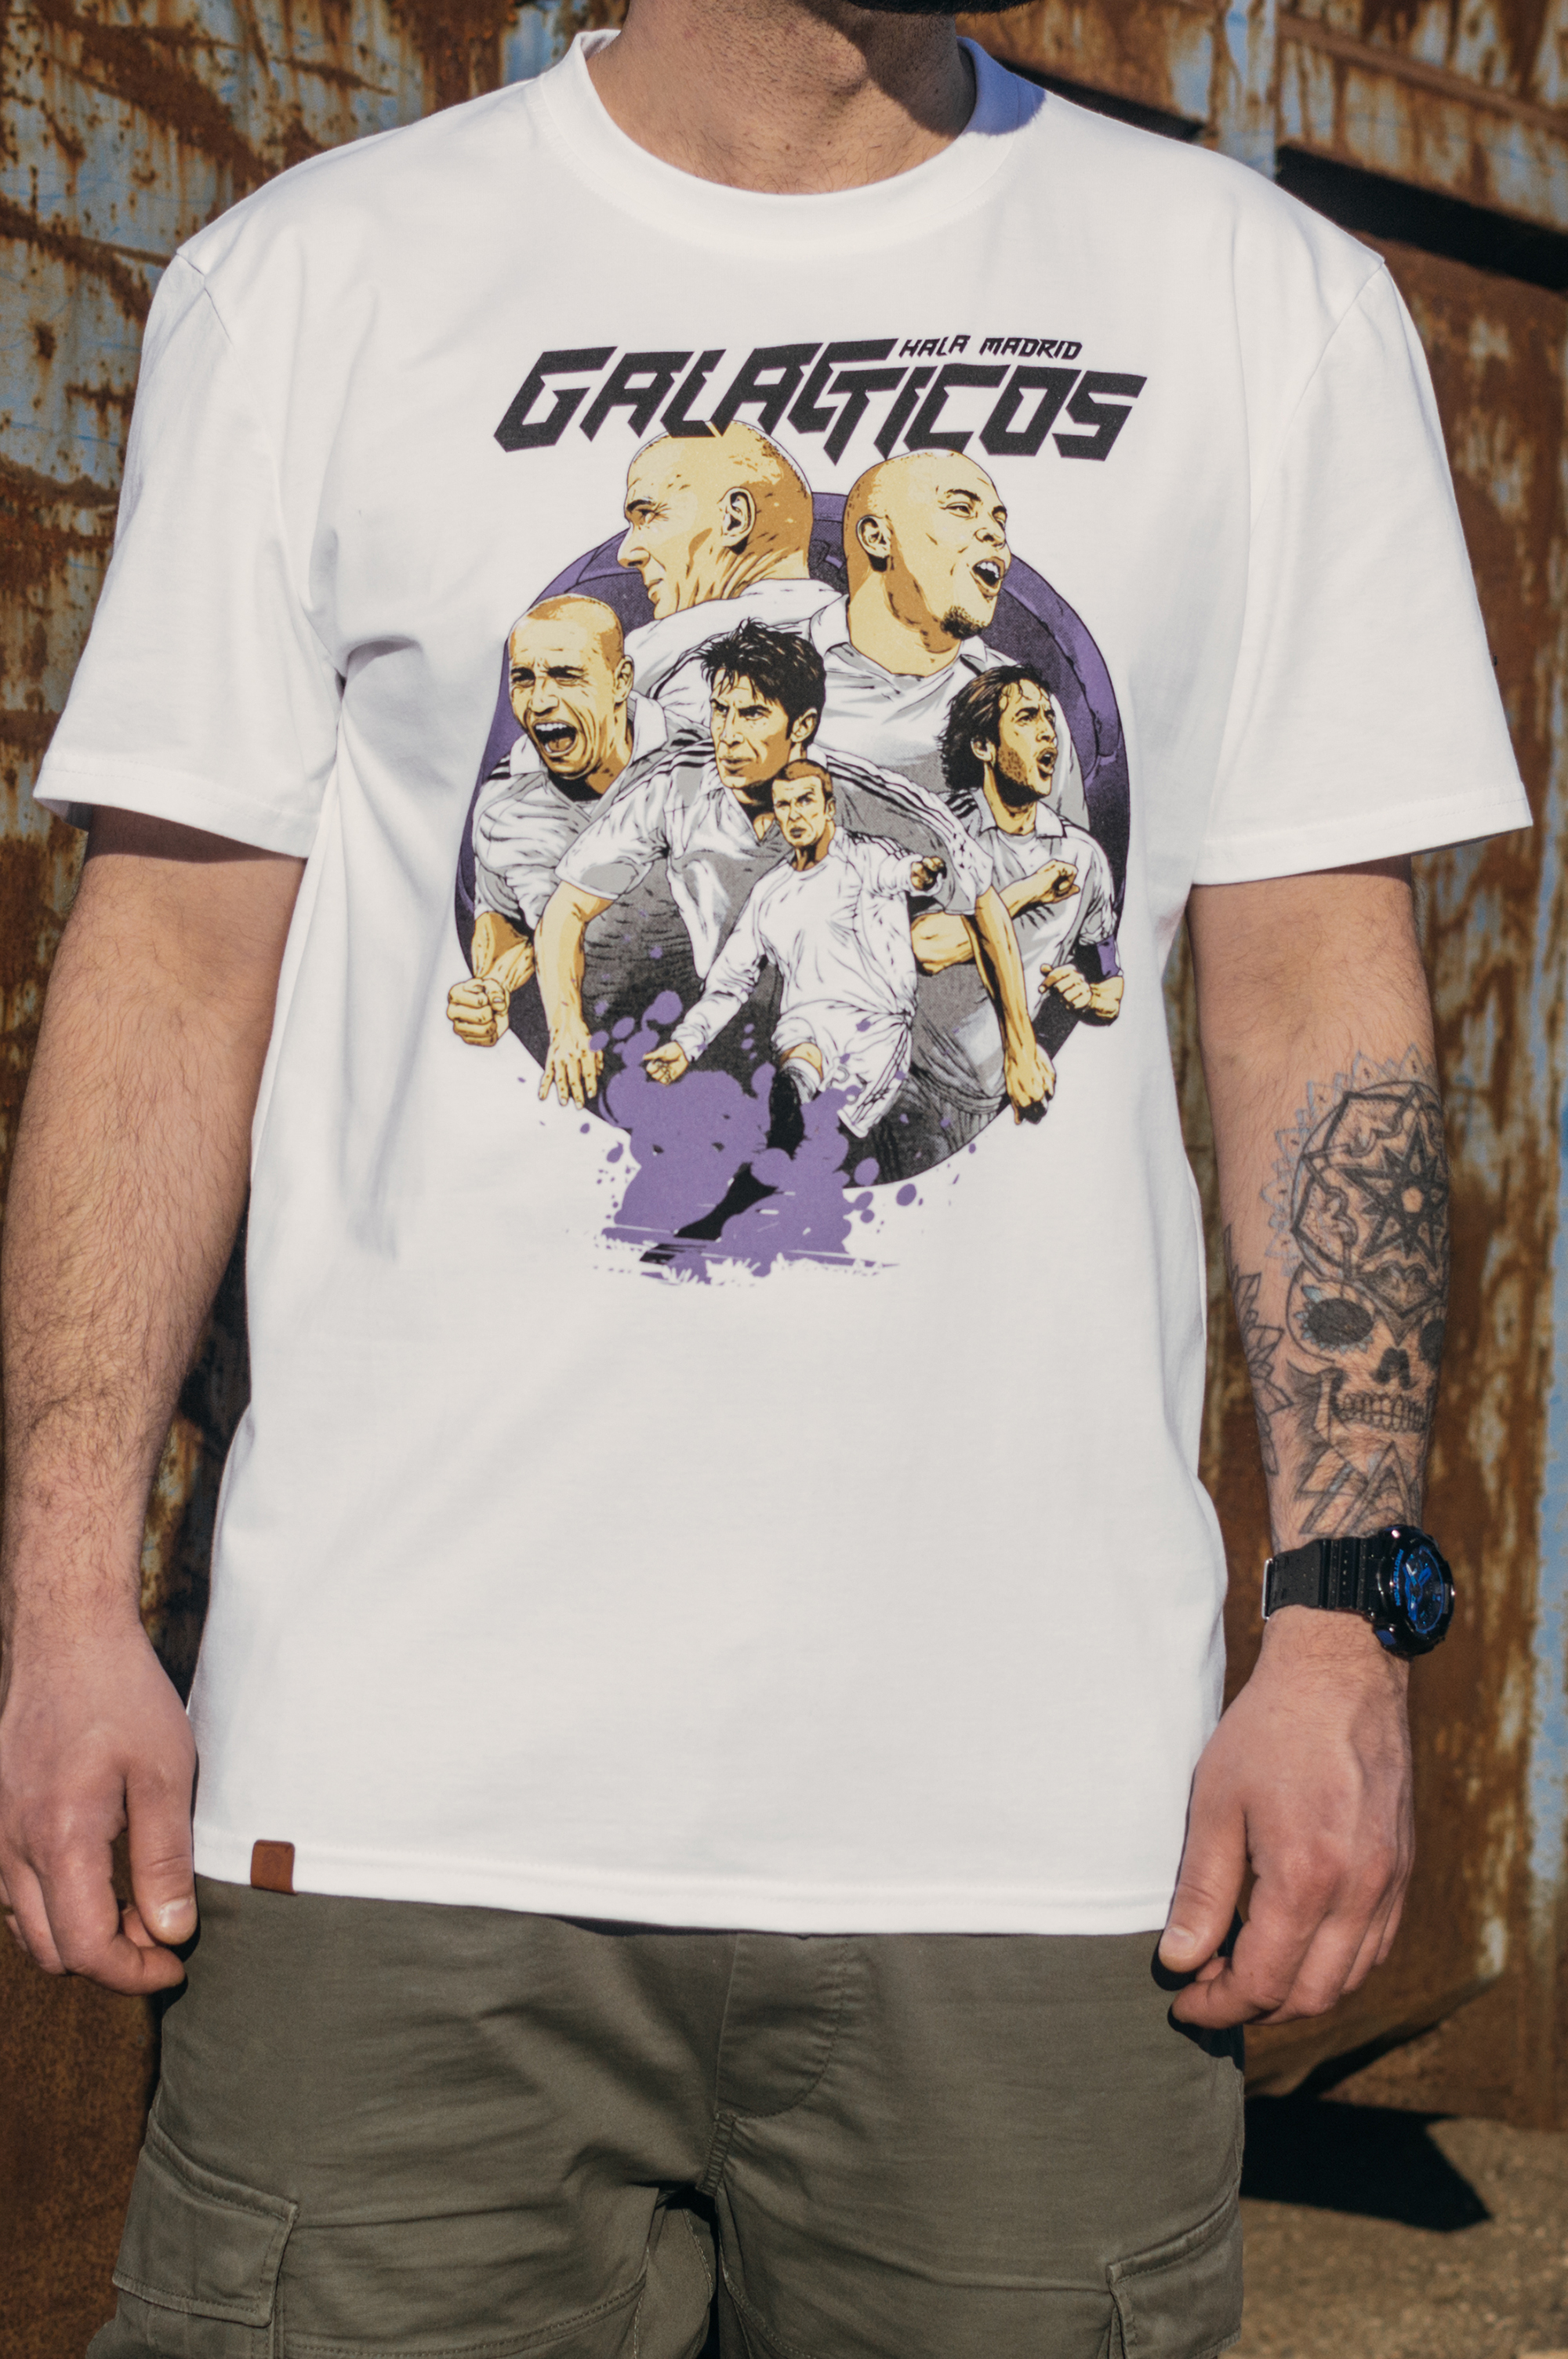 Galacticos - T-shirt for Real Madrid fans 